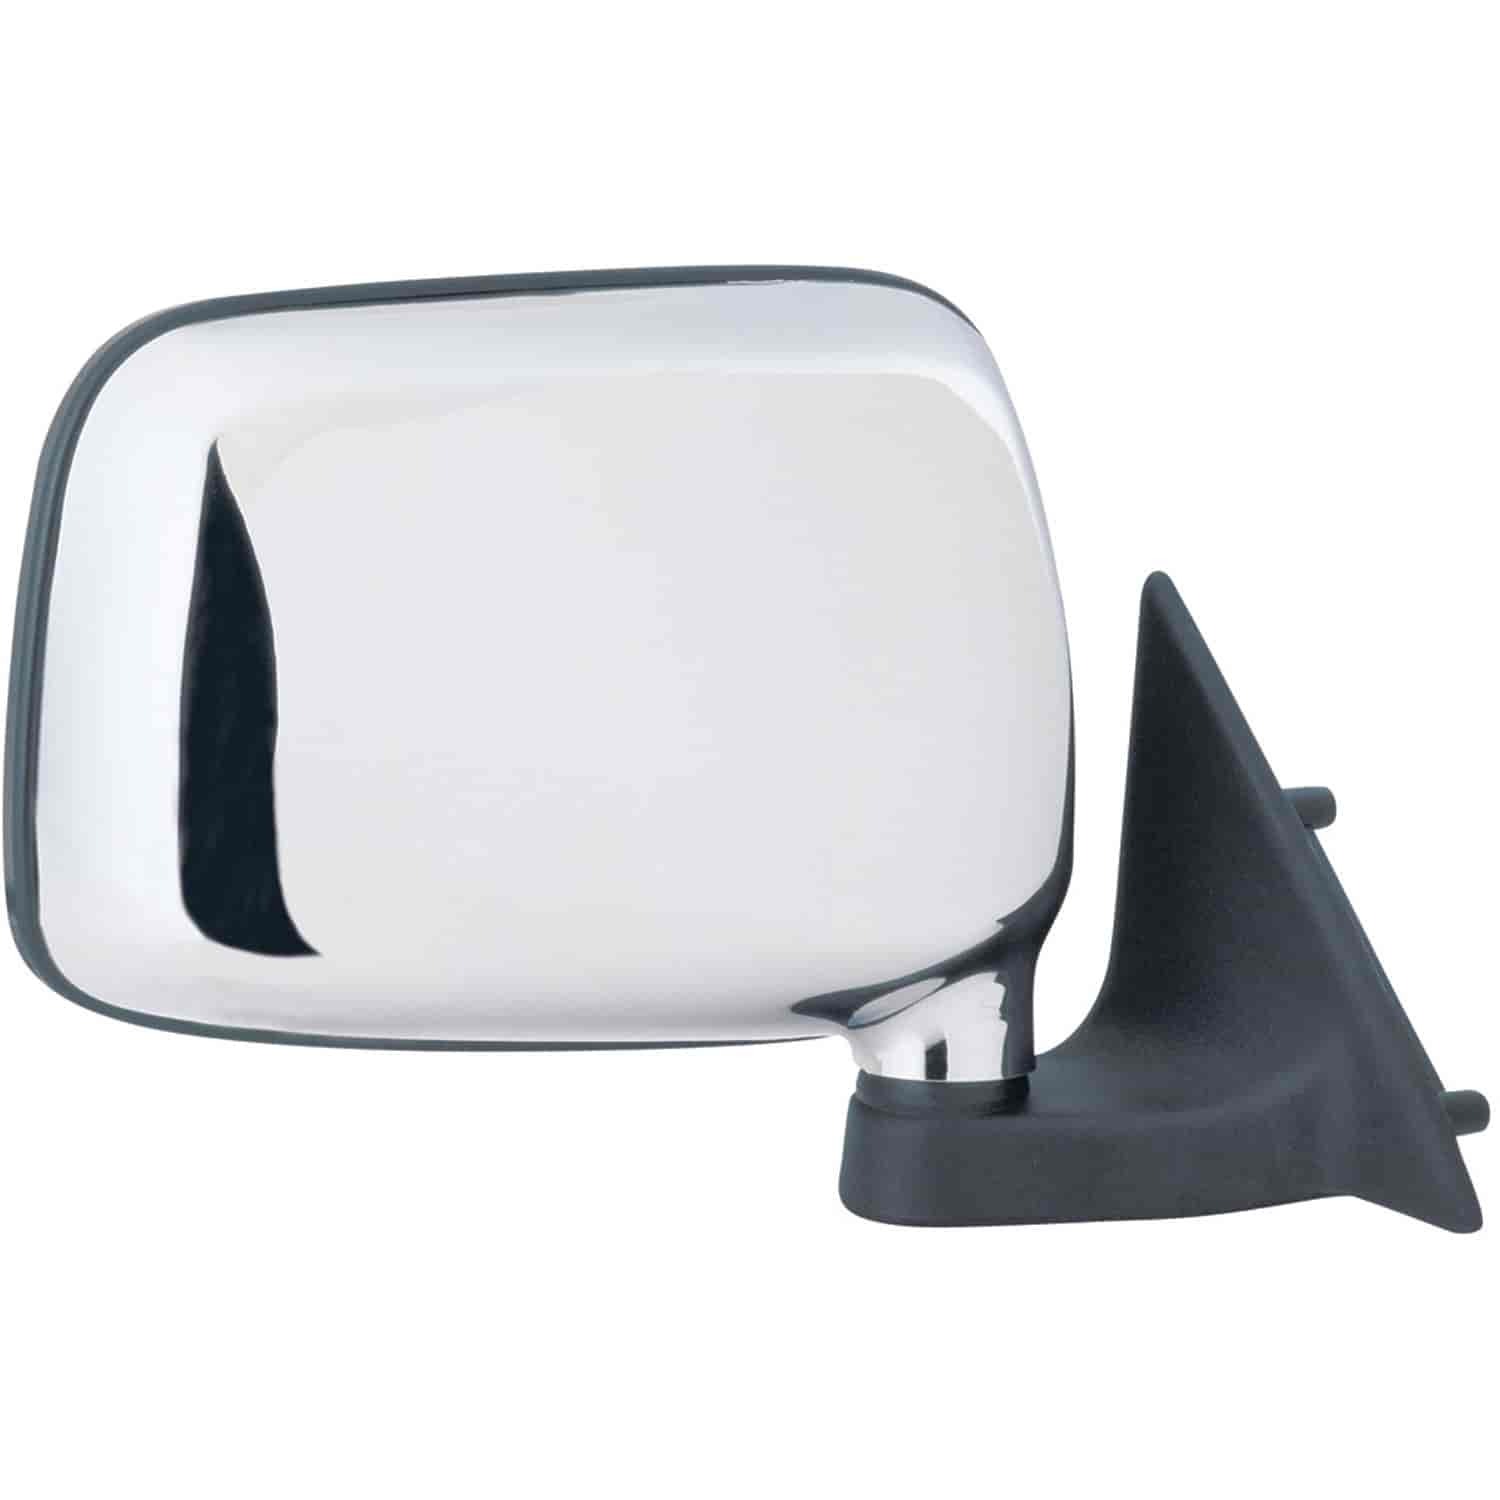 OEM Style Replacement mirror for 86-93 Mazda Pick-Up passenger side mirror tested to fit and functio